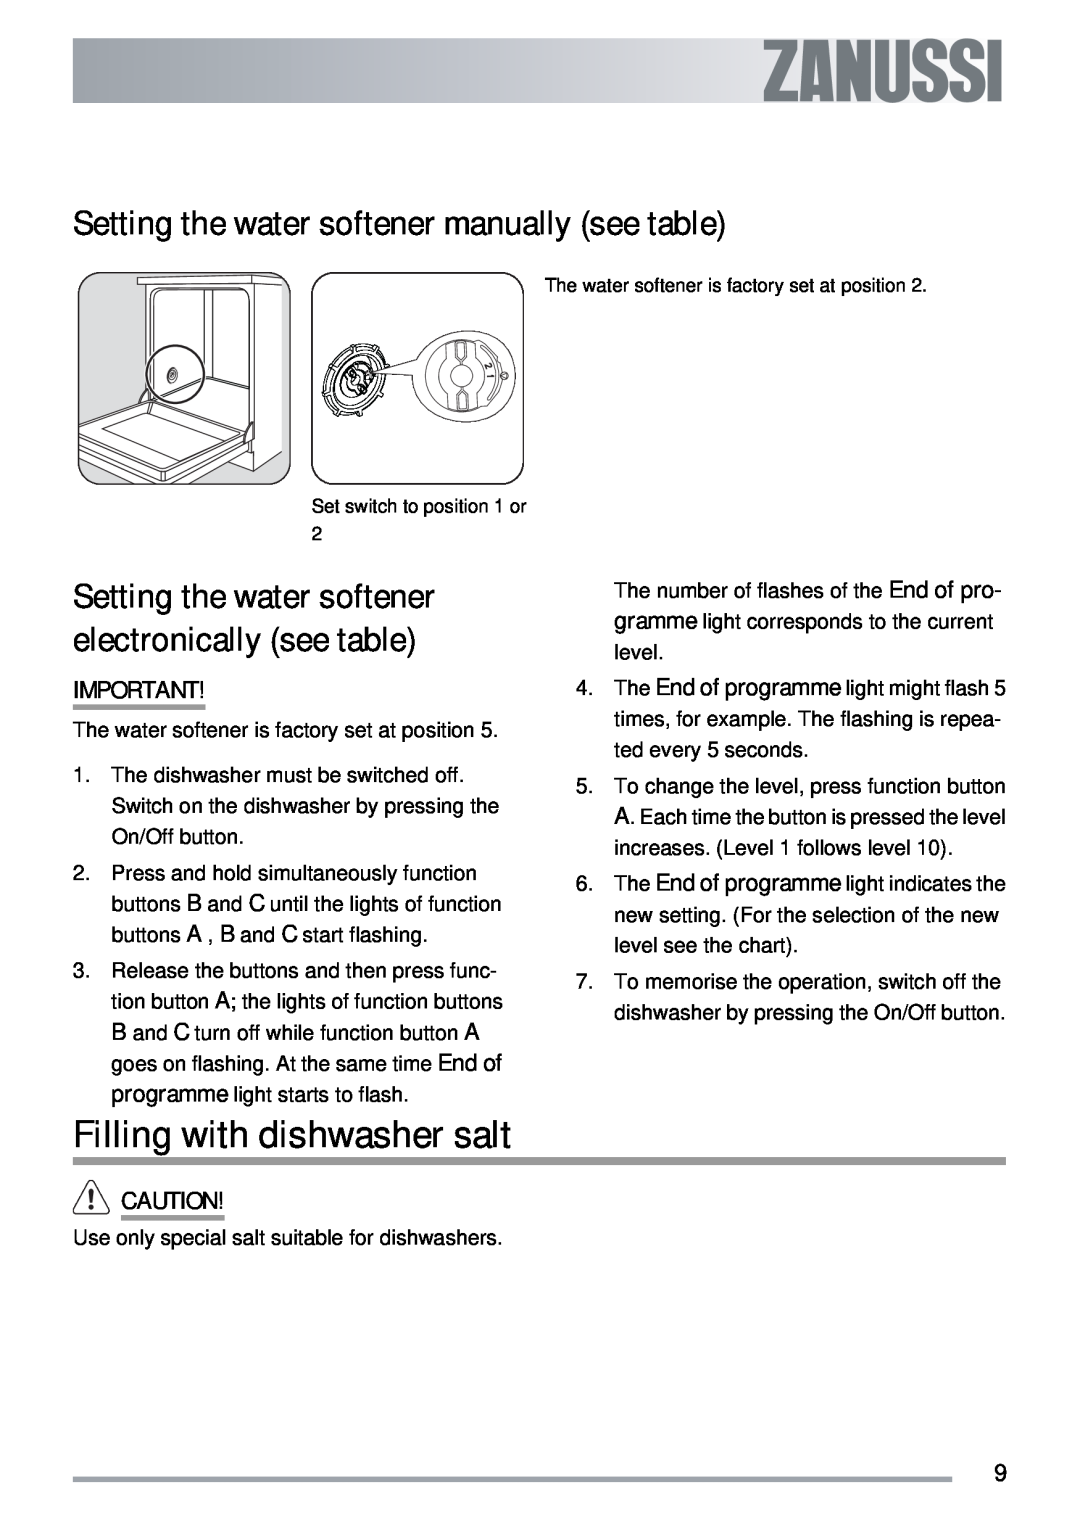 Zanussi ZSF 4143 user manual Filling with dishwasher salt, Setting the water softener manually see table 